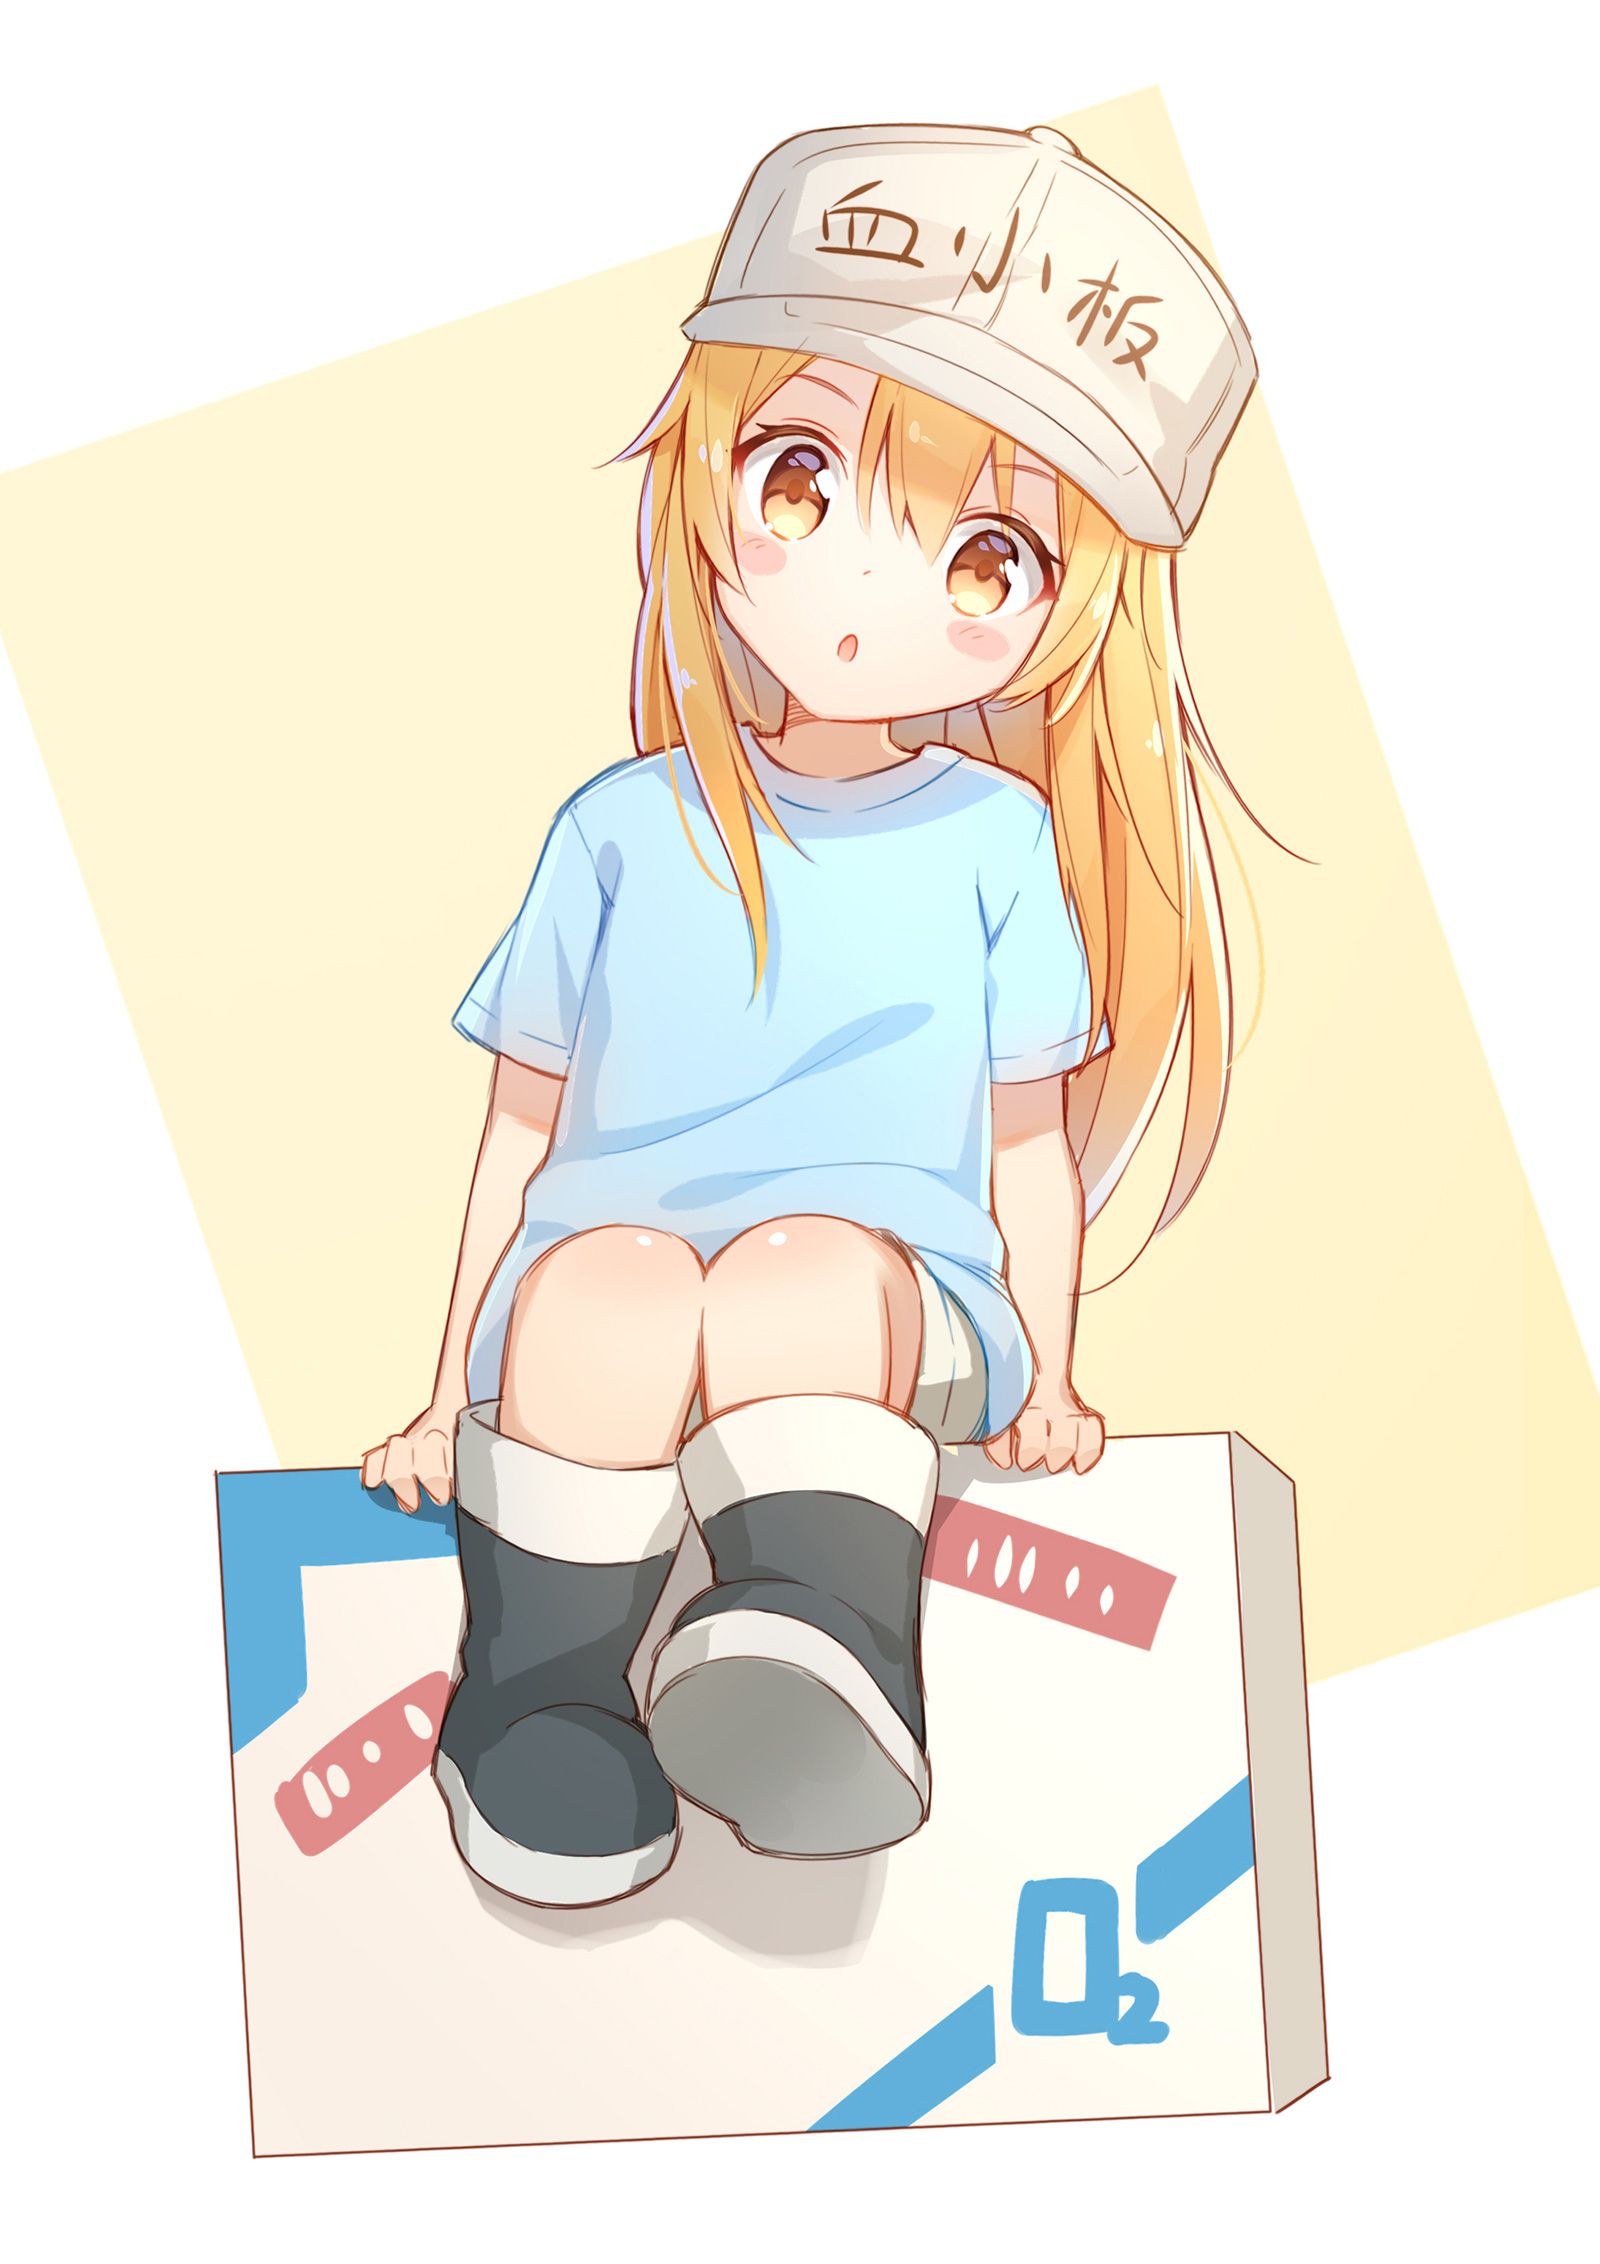 [Working cells] secondary images of platelets 1 60 sheets [ero/non-erotic] 24